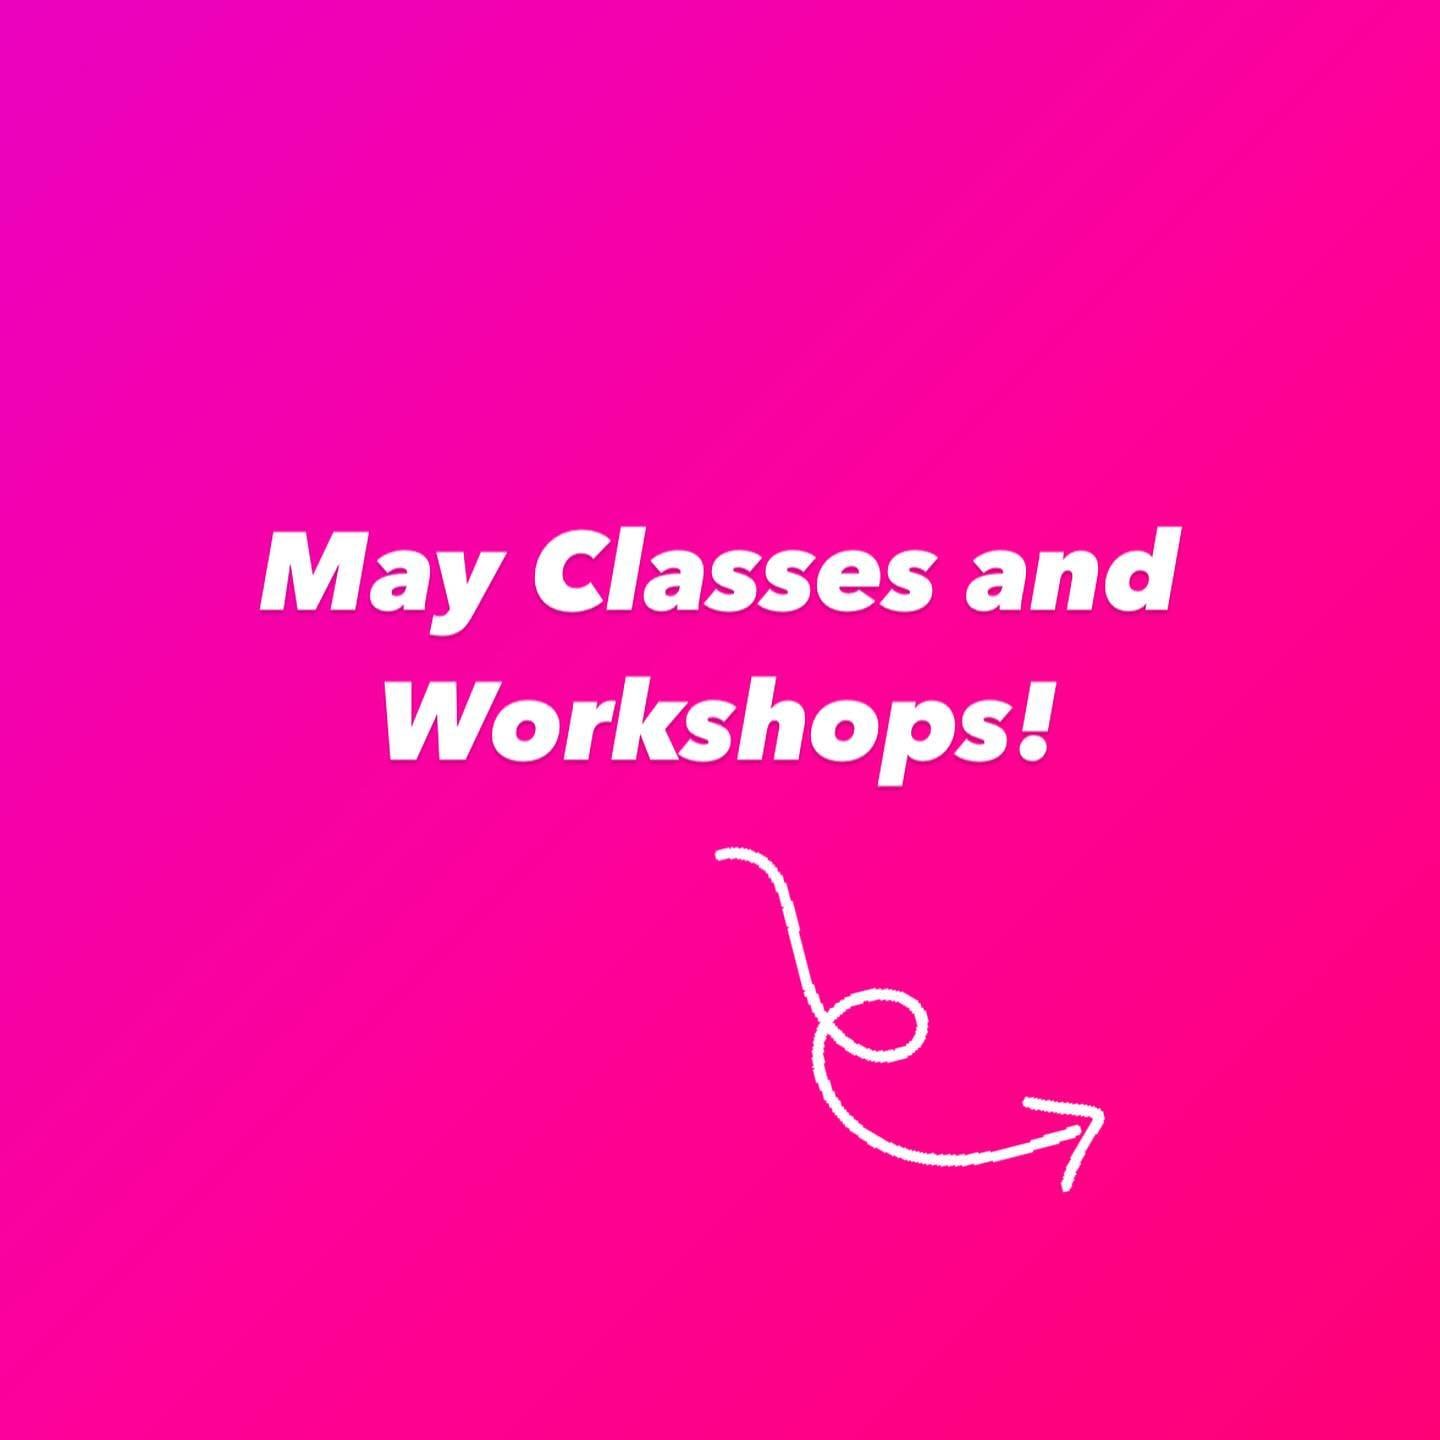 May 11th: Beginner Crochet: Mother&rsquo;s Day Edition 

May 12th: Series start of Colorwork Socks: Intermediate Knitting

May 15th: Crochet Granny Square for Beginner PLUS (folks who already know a bit of the basics)

May 17th: Beginner Knitting: Fa